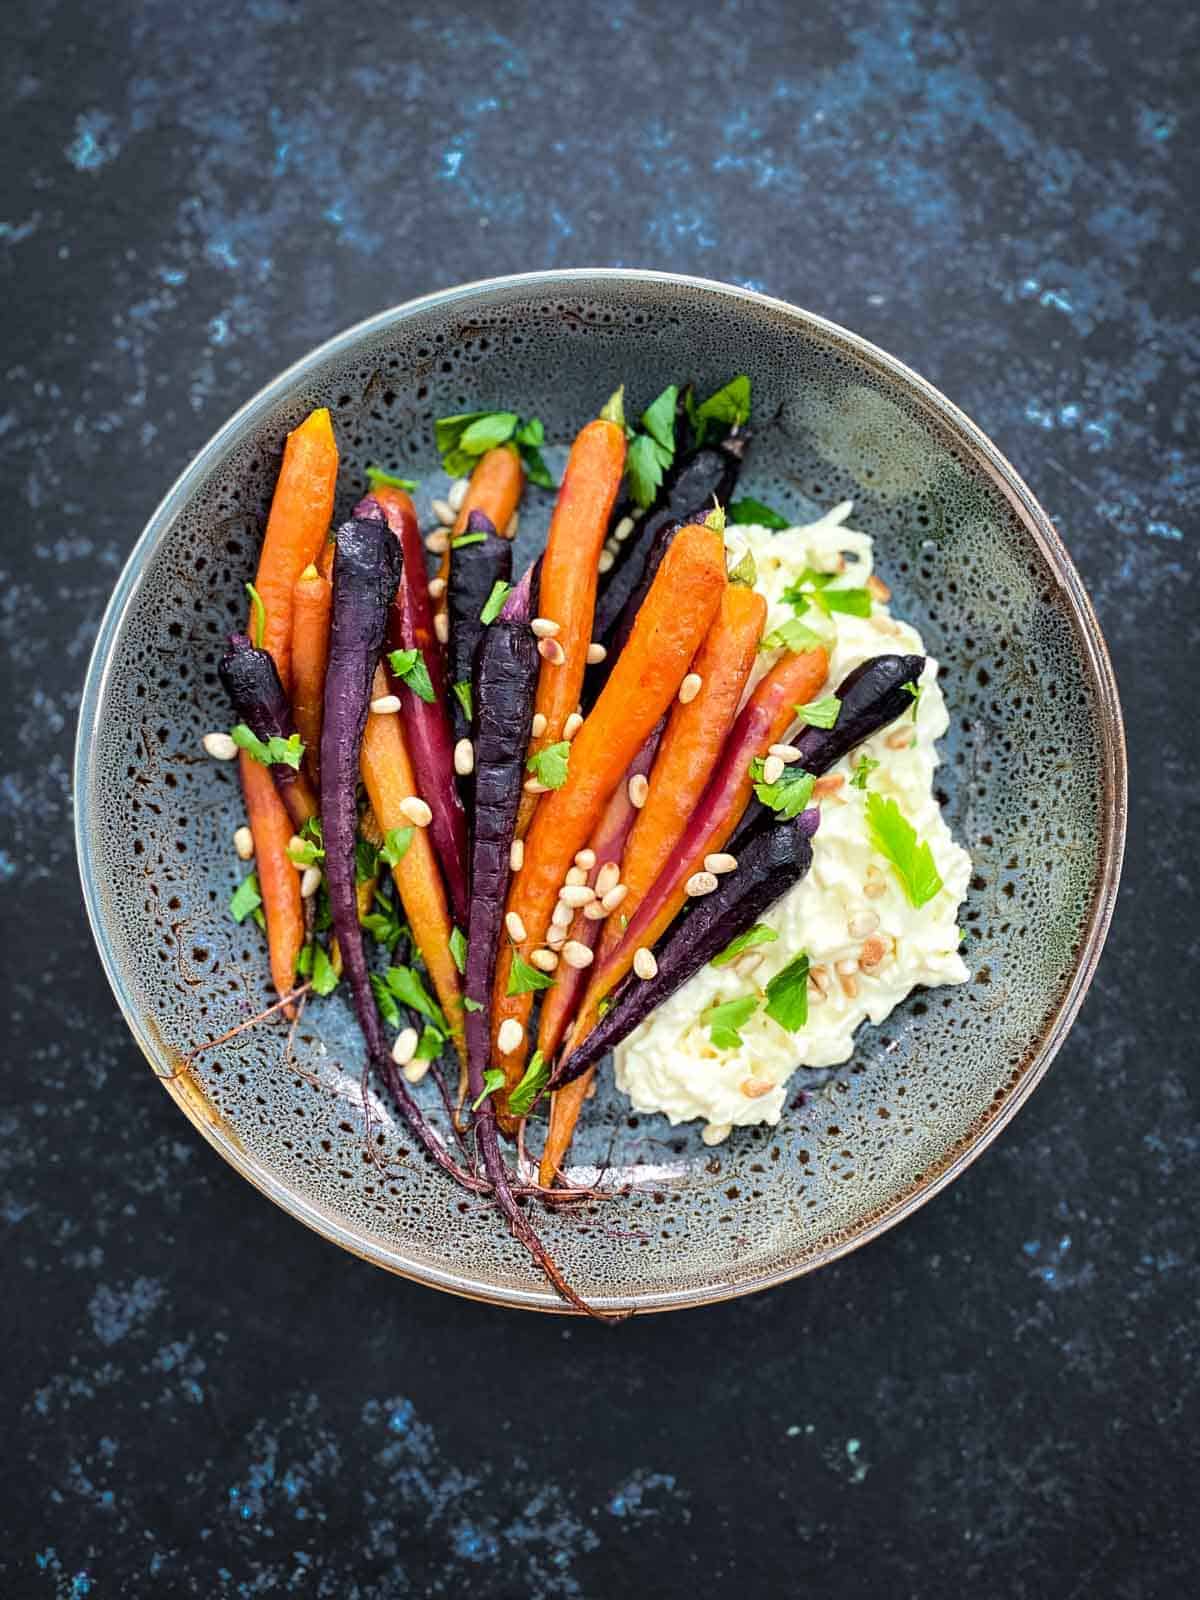 Roasted Maple Carrots with Stracciatella Cheese in a grey bowl